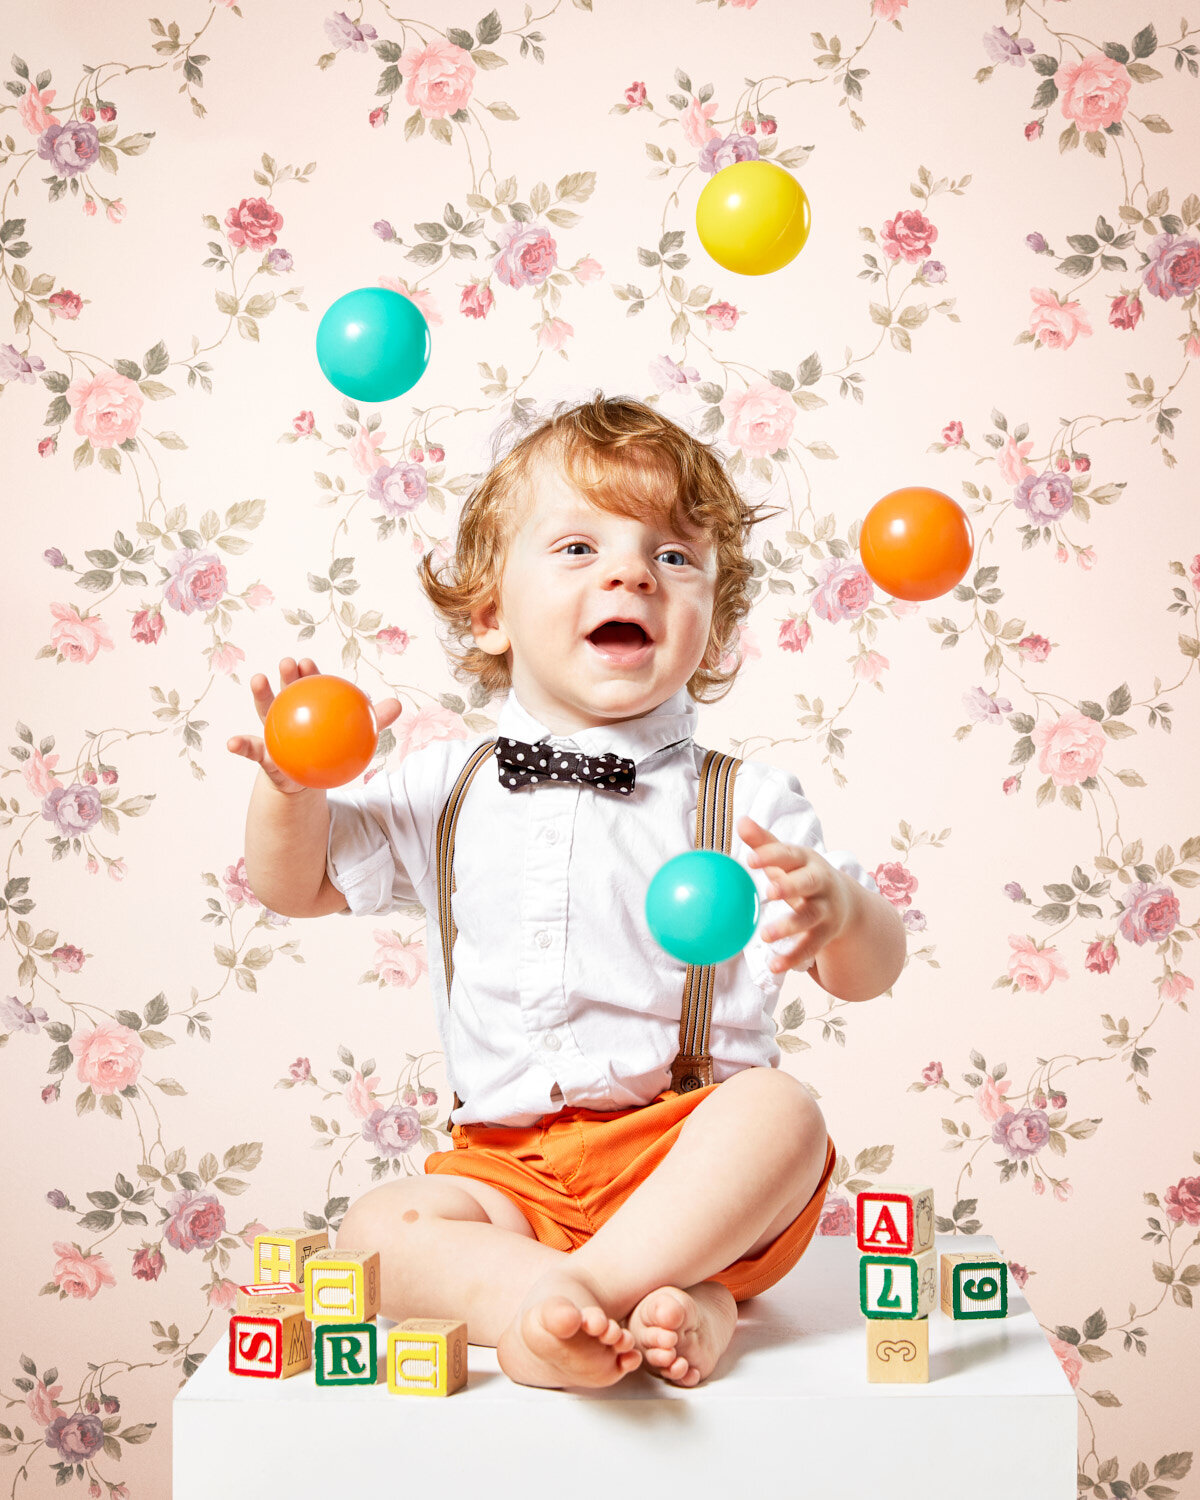 small child with bowtie and suspenders juggling colorful balls with vintage floral wallpaper by conceptual portrait photographer Hanna Agar